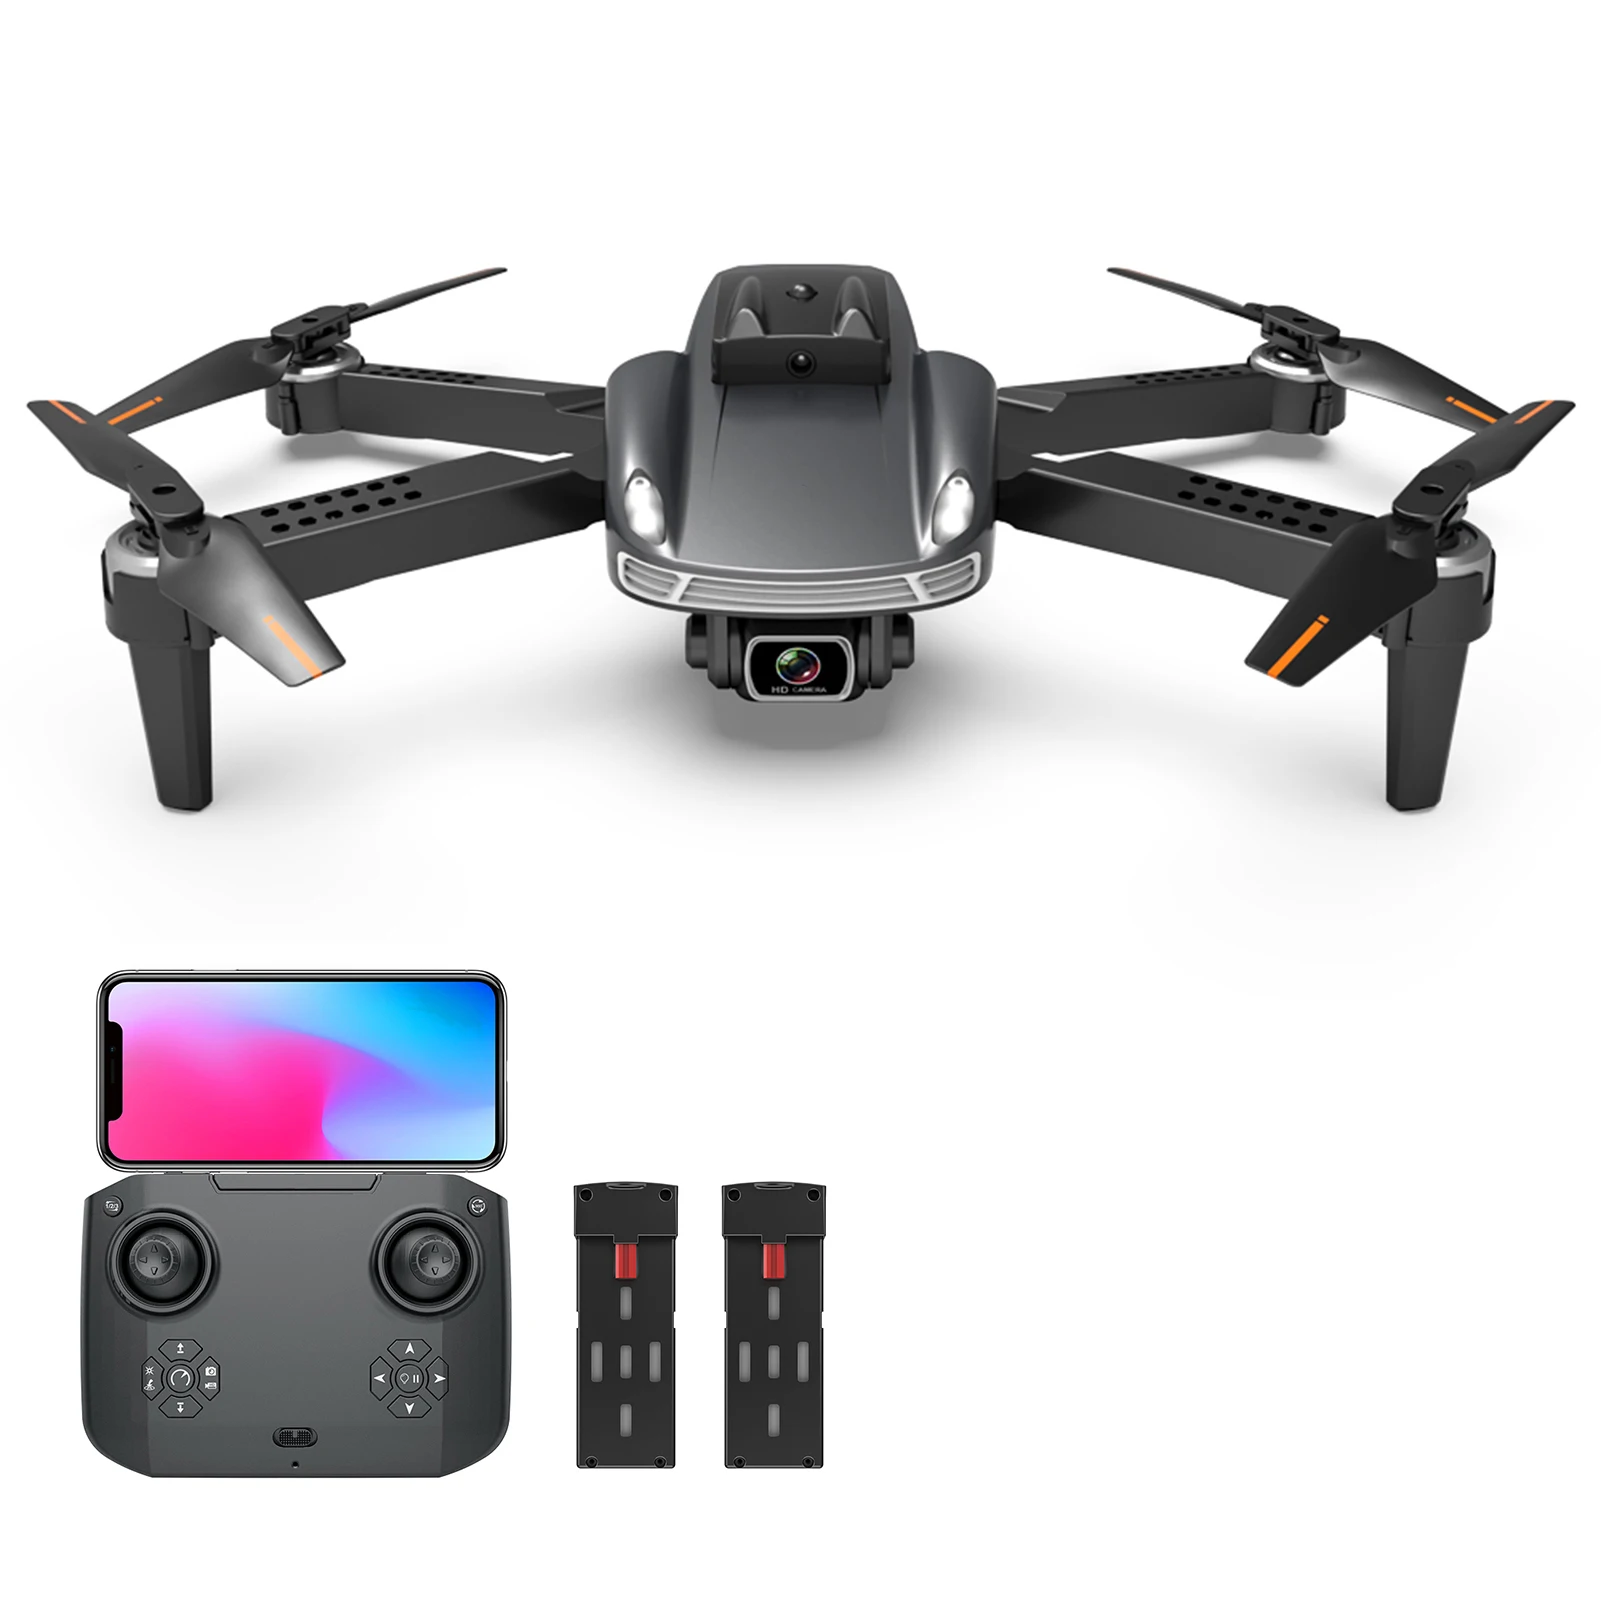 explorers 4ch remote control quadcopter RC Drone Camera 4K RC Toy Airplane RC Quadcopter with Function Obstacle Avoidance Gesture Control Storage Bag camoro quadcopter drone with camera and remote control RC Quadcopter